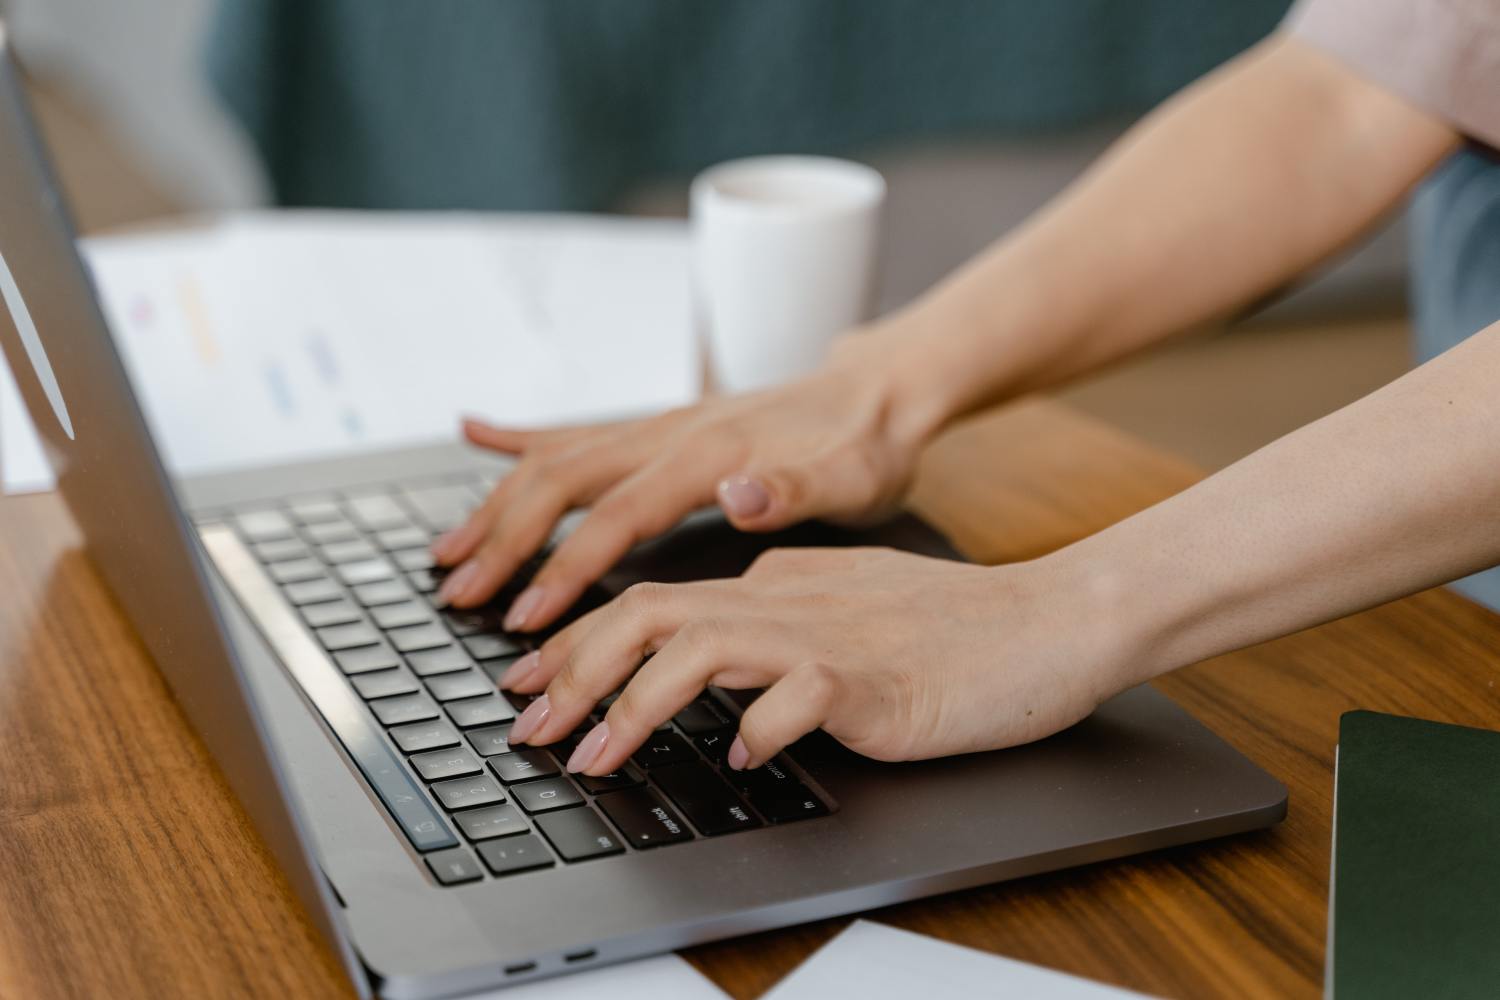 Woman's hands typing on computer to research probate vs non probate assets.